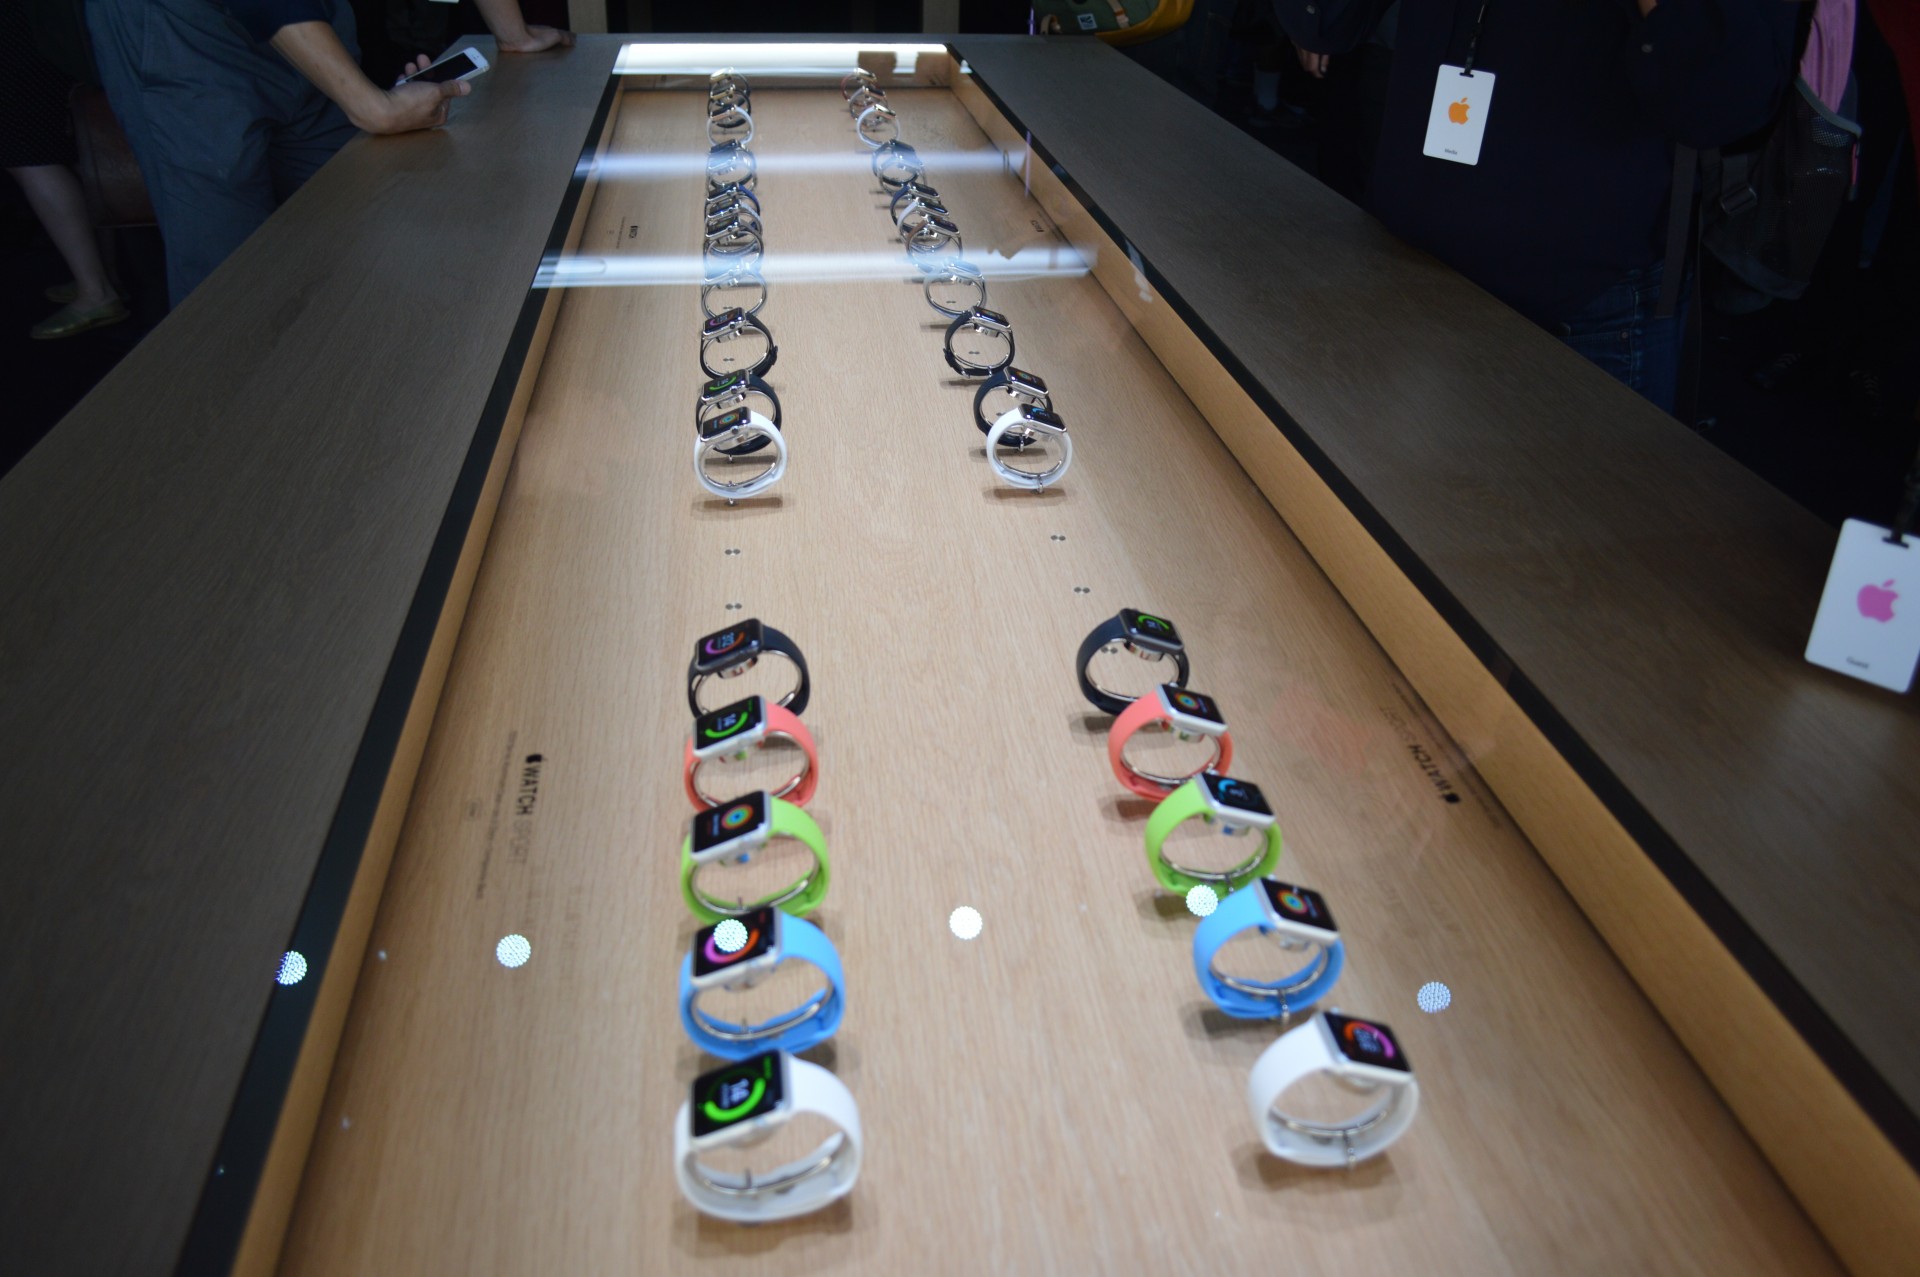 Apple Watch hands on table from September 